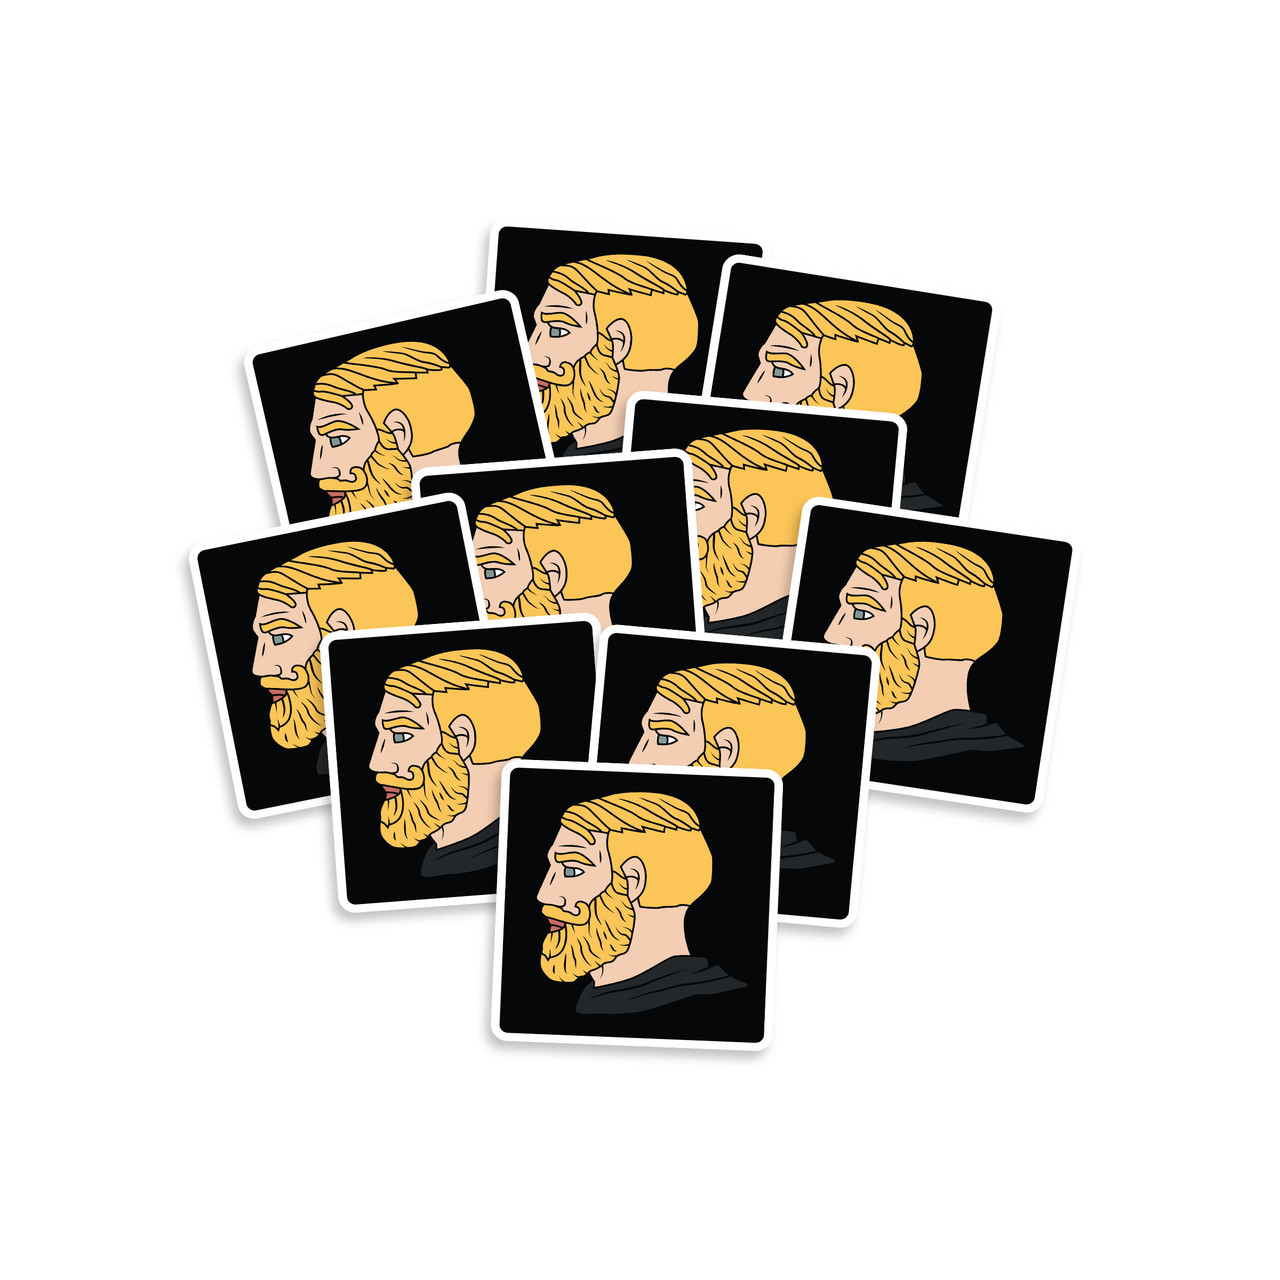 Yes Chad Stickers for Sale